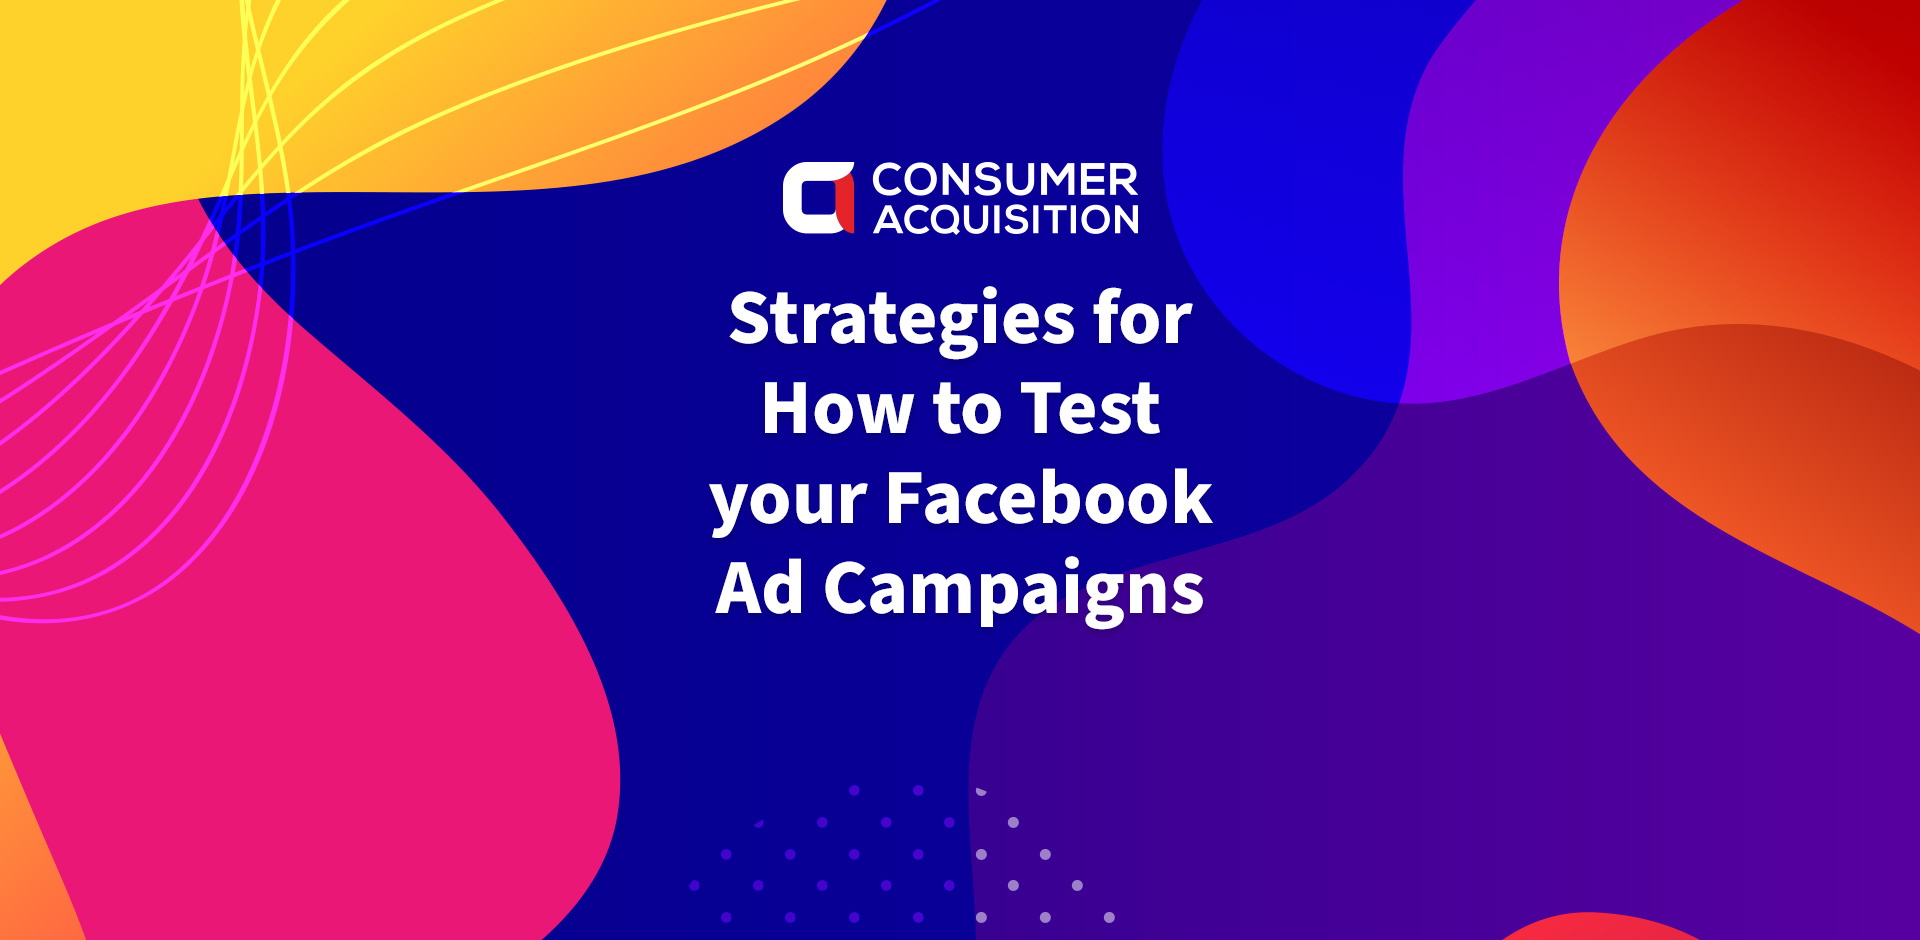 Strategies for How to Test your Facebook Ad Campaigns